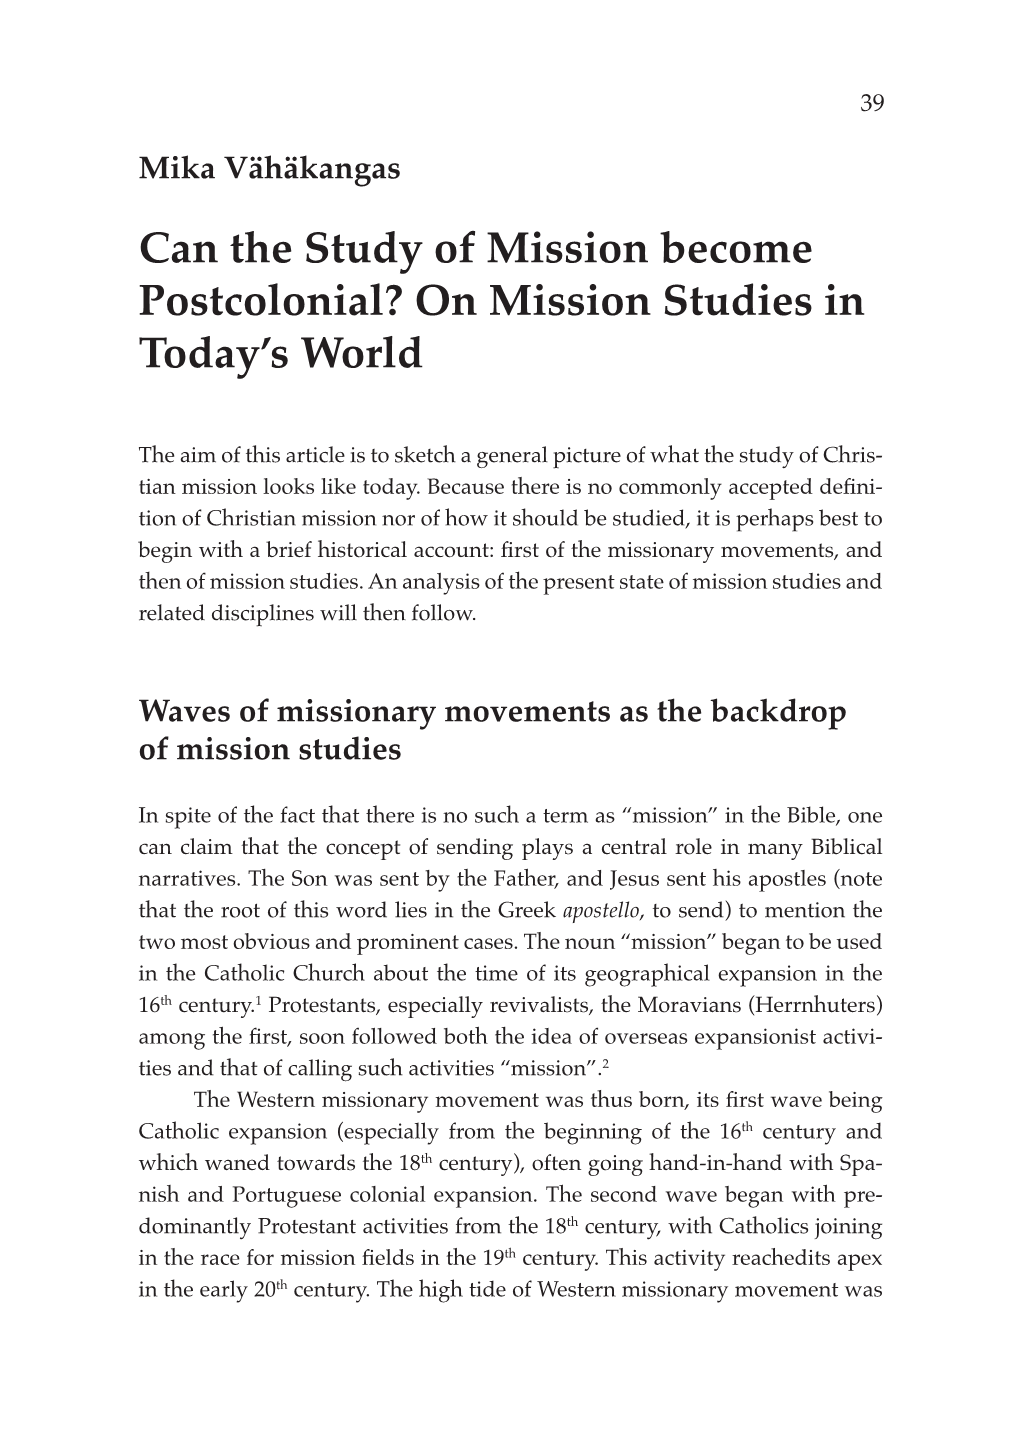 Can the Study of Mission Become Postcolonial? on Mission Studies in Today’S World